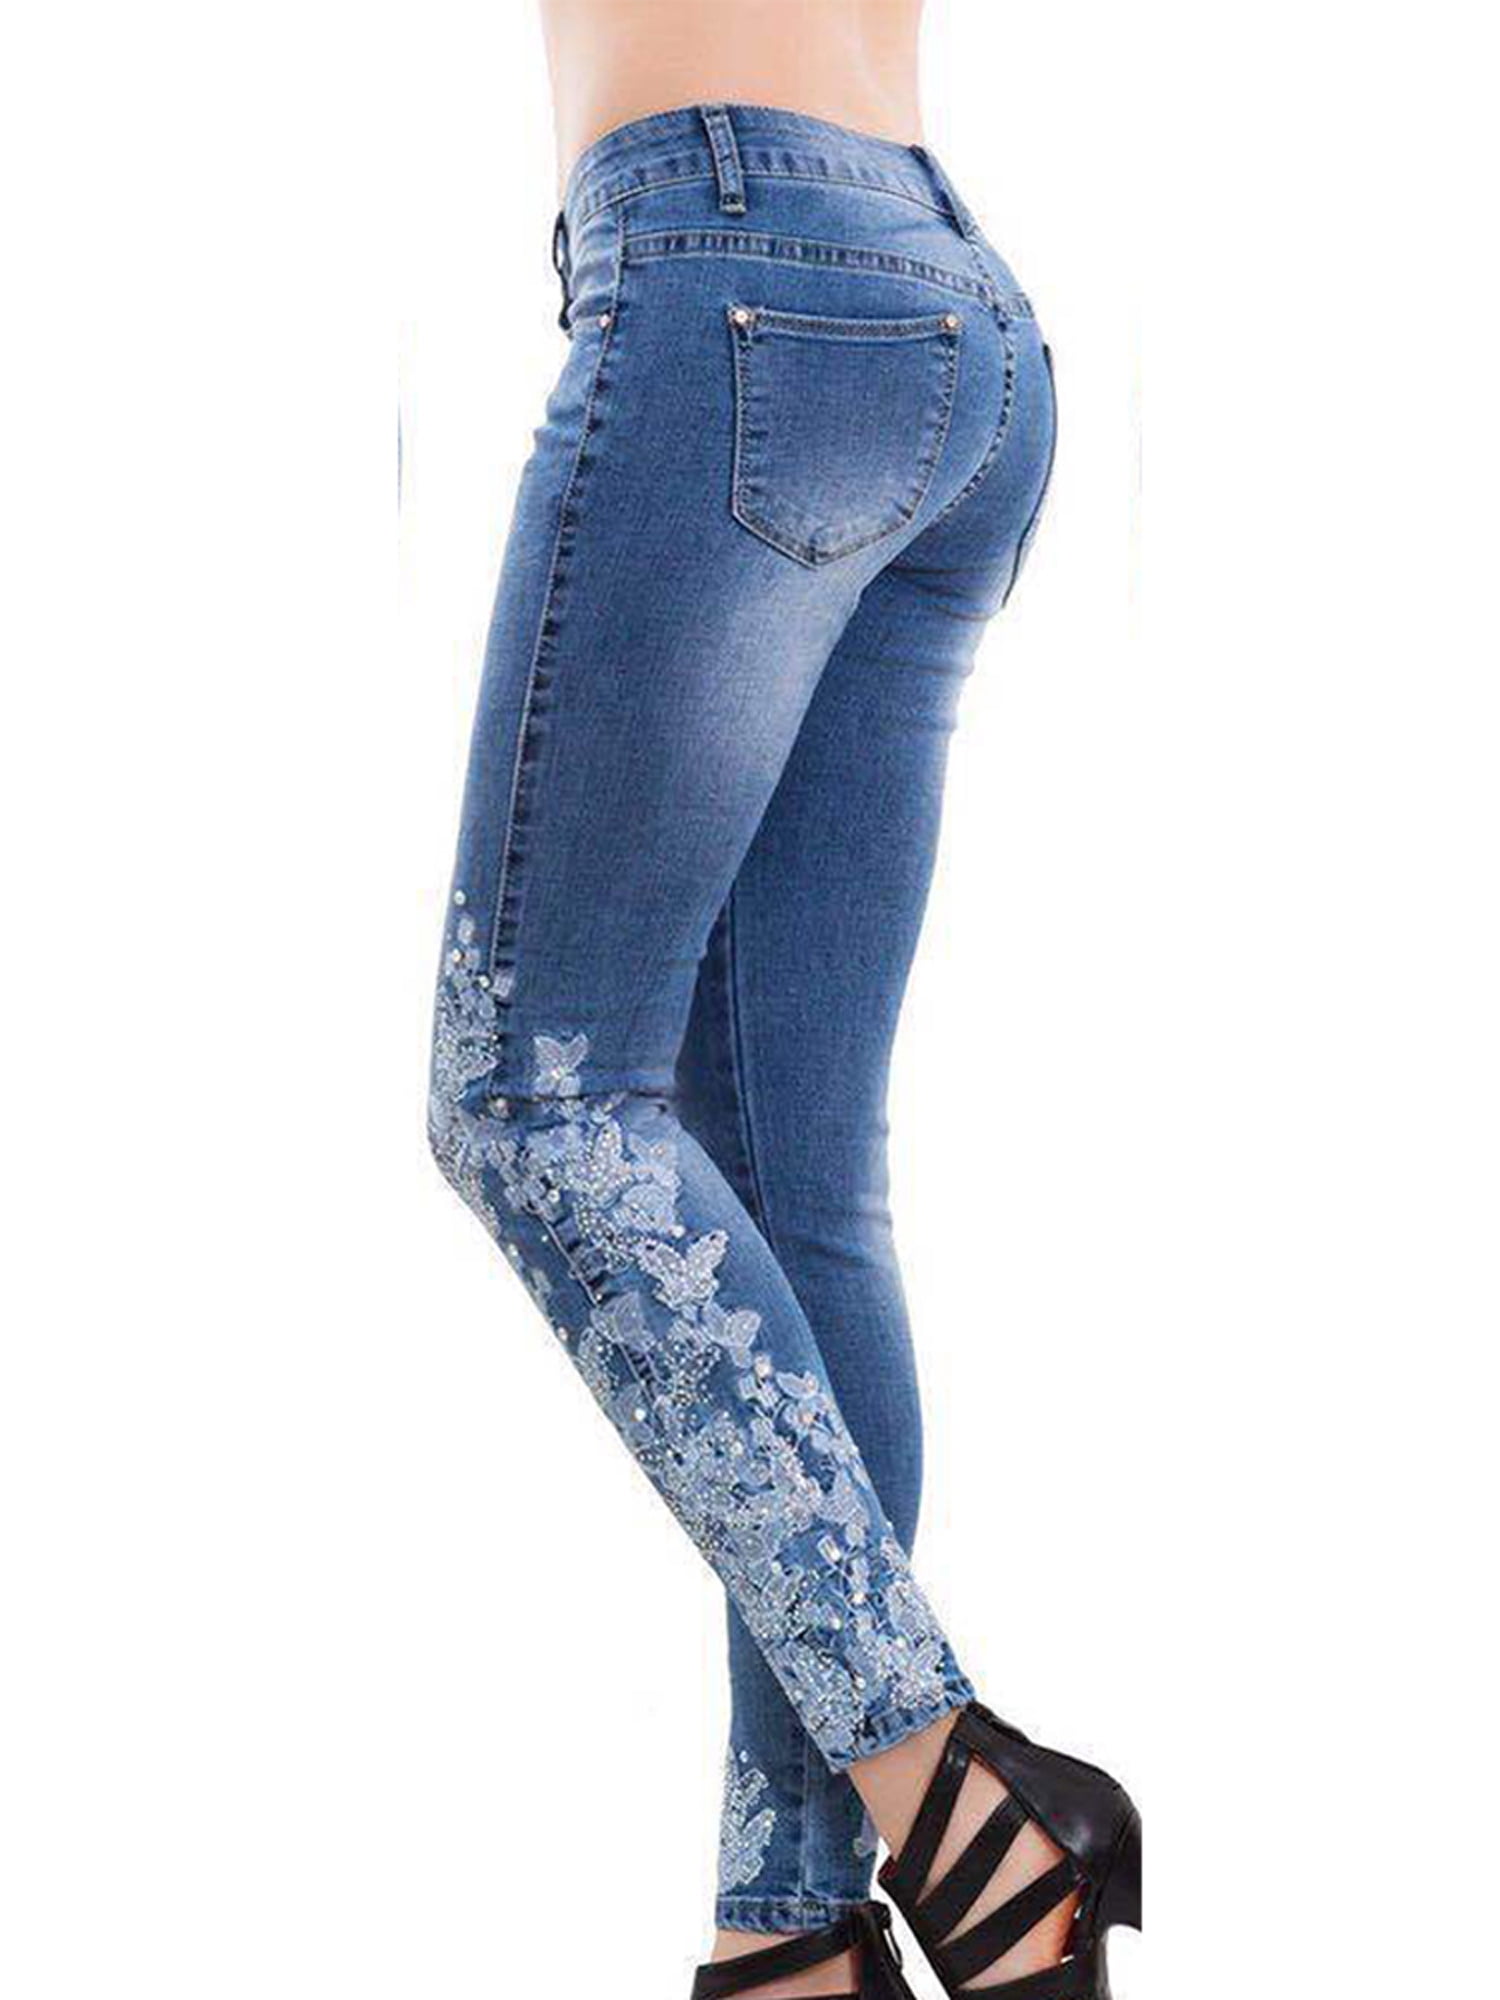 discount 77% WOMEN FASHION Jeans Embroidery Elogy Jeggings & Skinny & Slim Navy Blue 